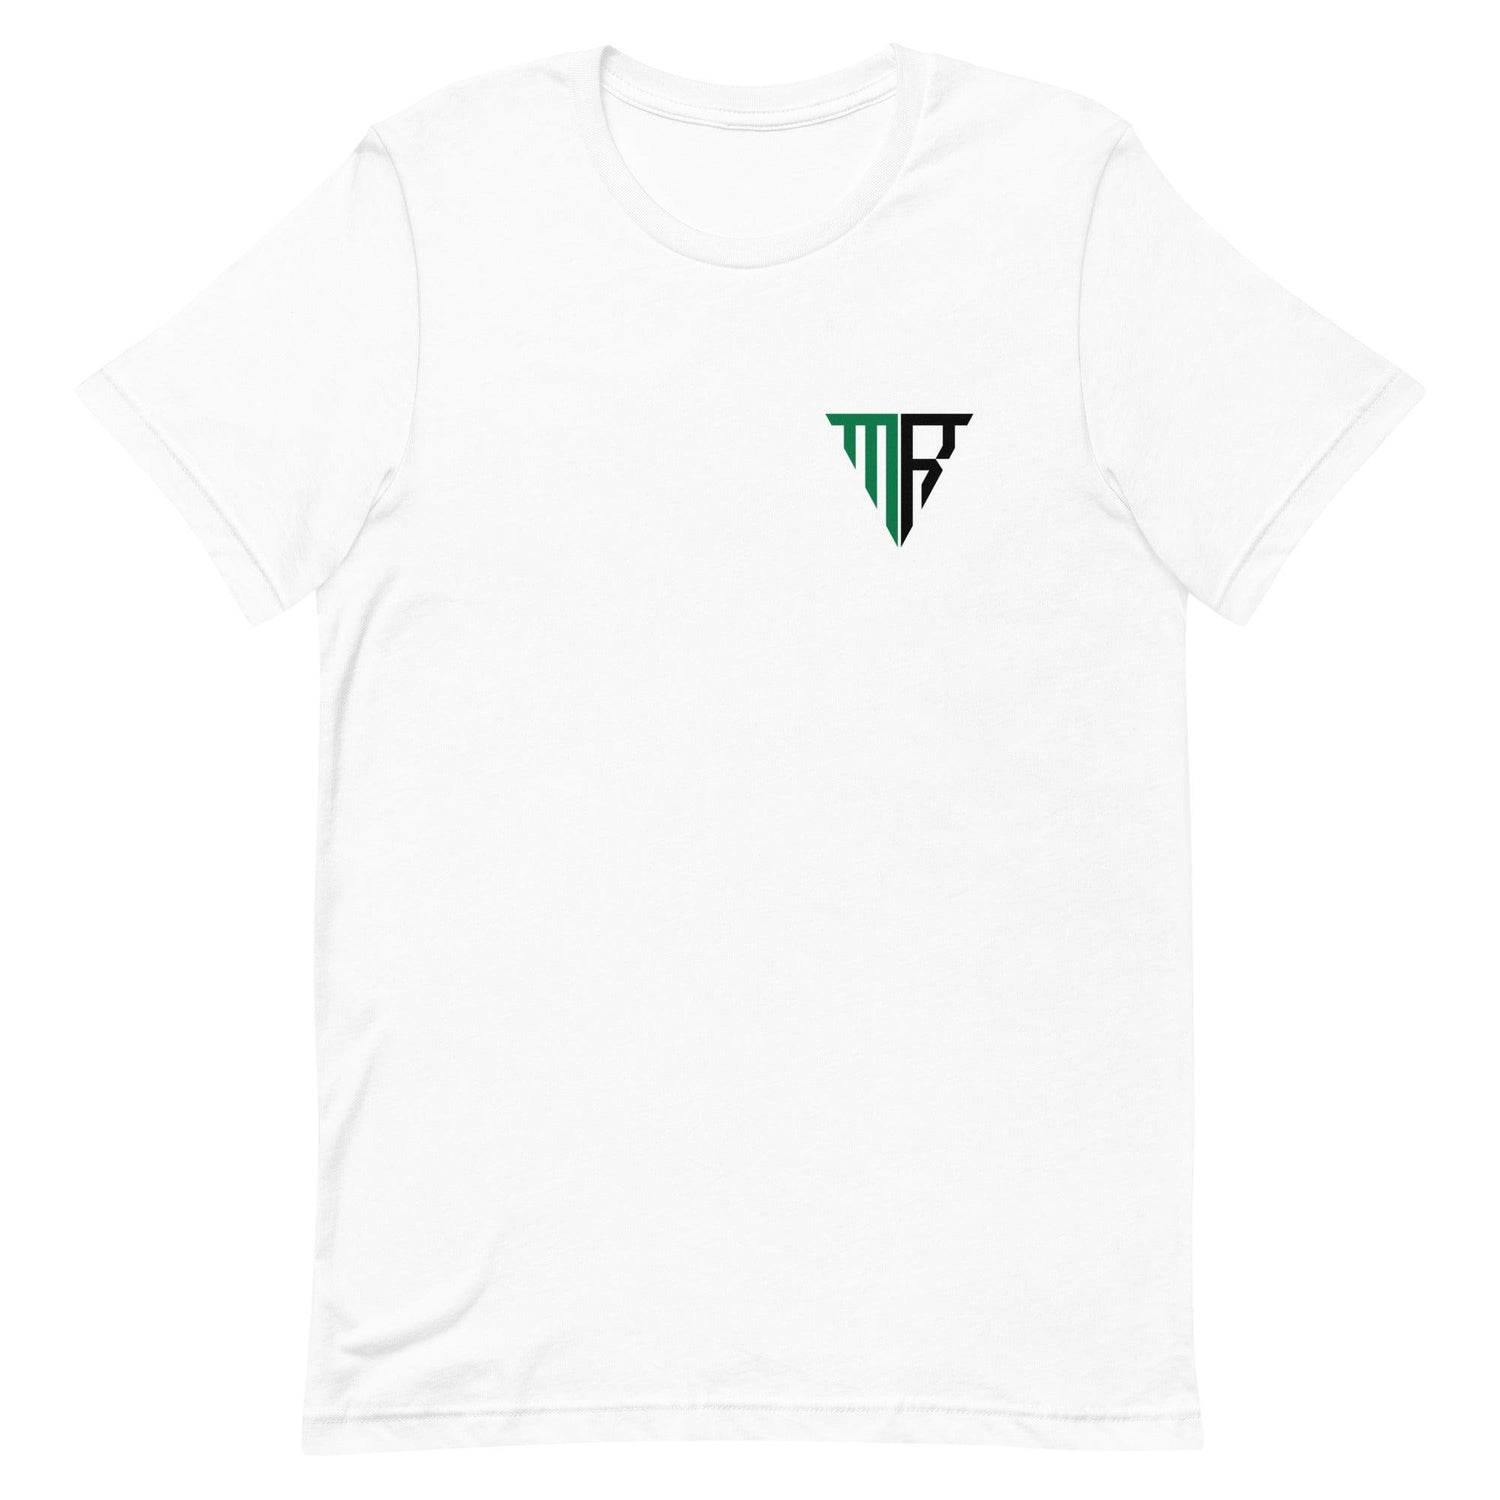 Max Reese "Essential" t-shirt - Fan Arch